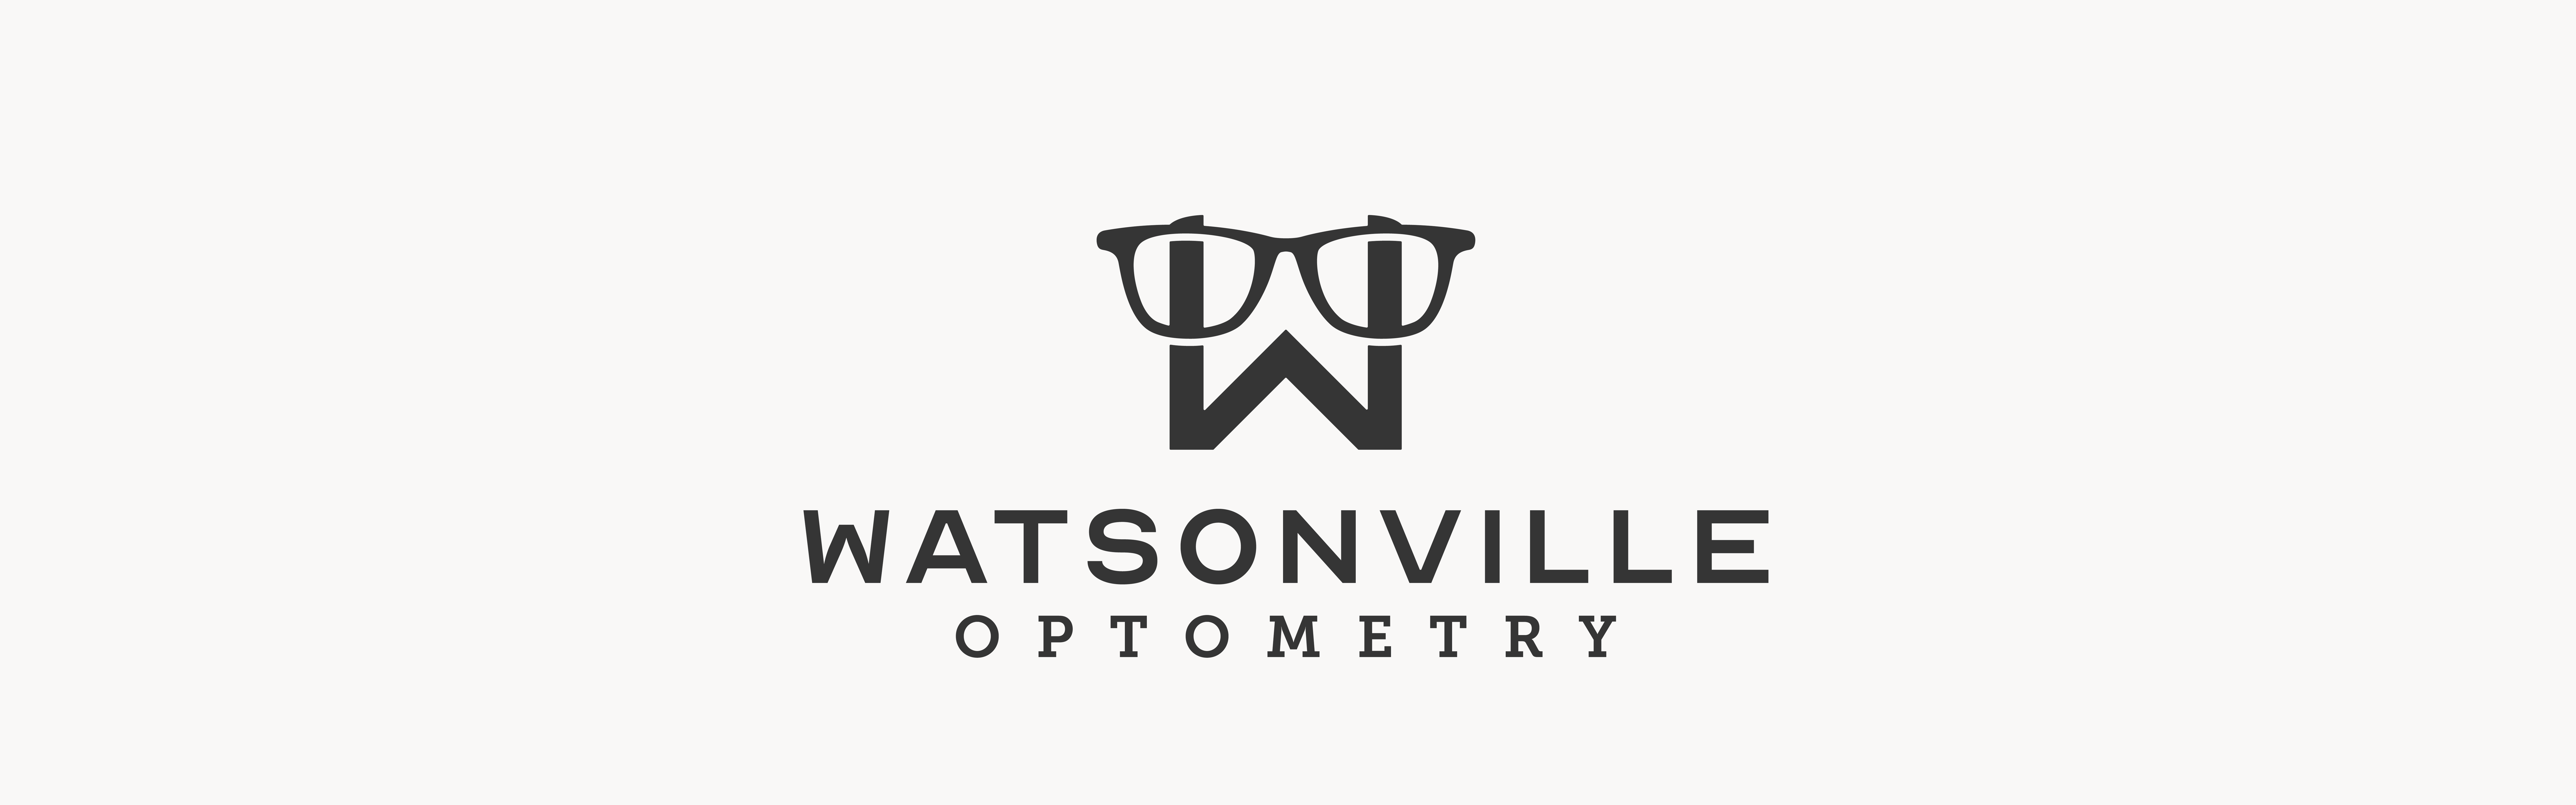 Logo for "Watsonville Optometry" featuring stylized eyeglasses integrating the letter "W" above the company name.